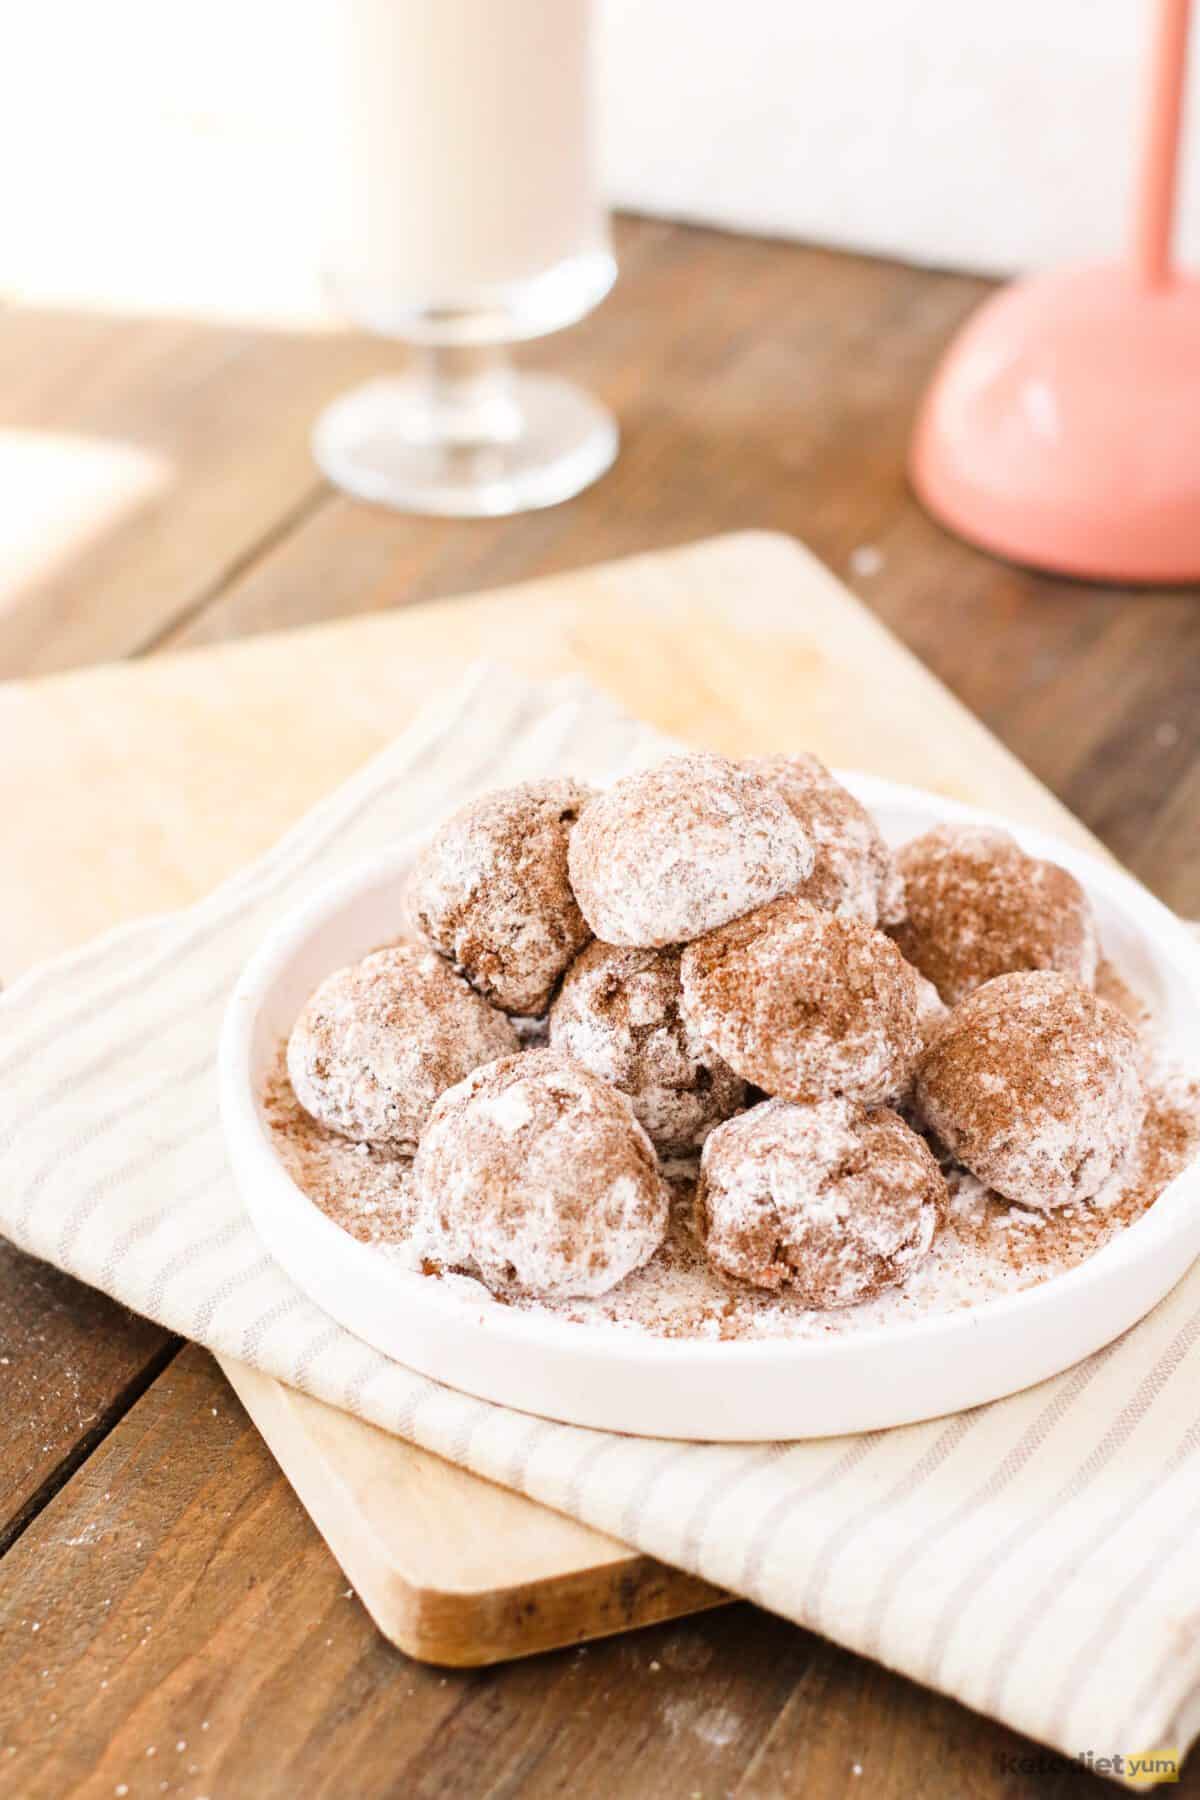 Keto donut holes on a plate coated with a cinnamon sugar coating